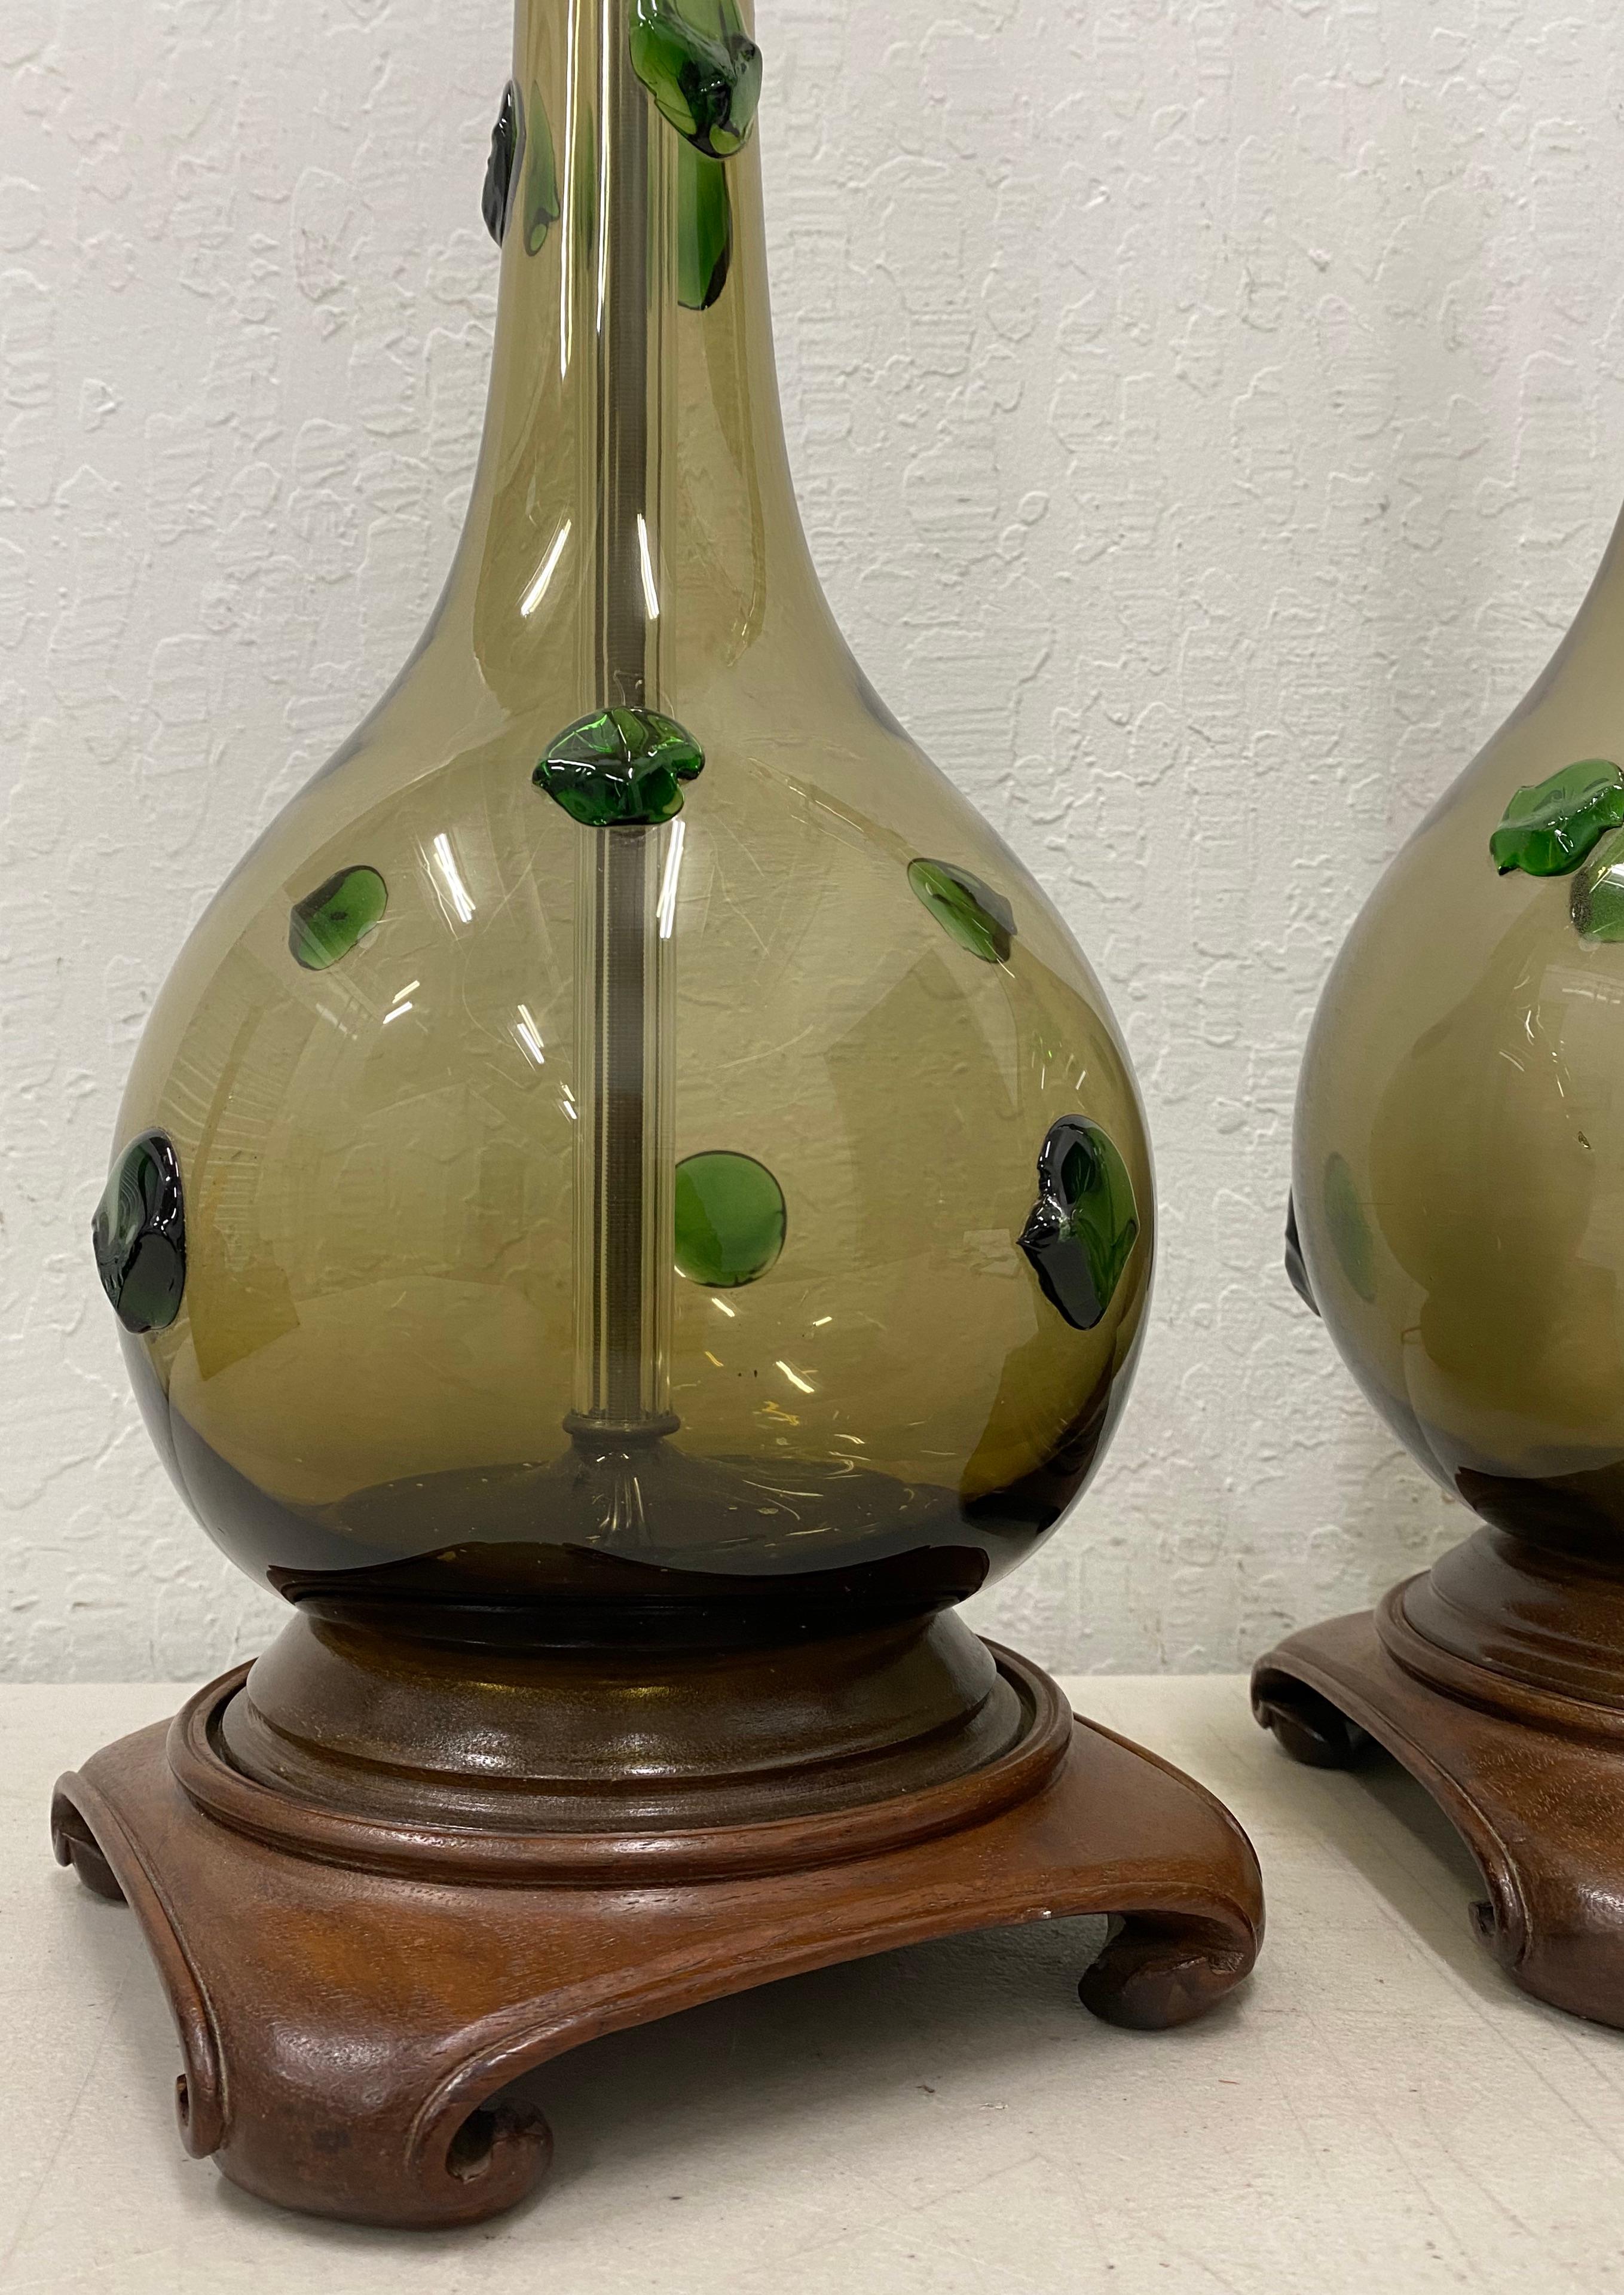 Pair of Mid-Century Modern hand blown glass lamps with green prunt drops

Gorgeous midcentury table lamps.

Each lamp is hand blown and has green candy-like prunt drops

The lamps sit atop hand carved walnut bases

Dimensions 8